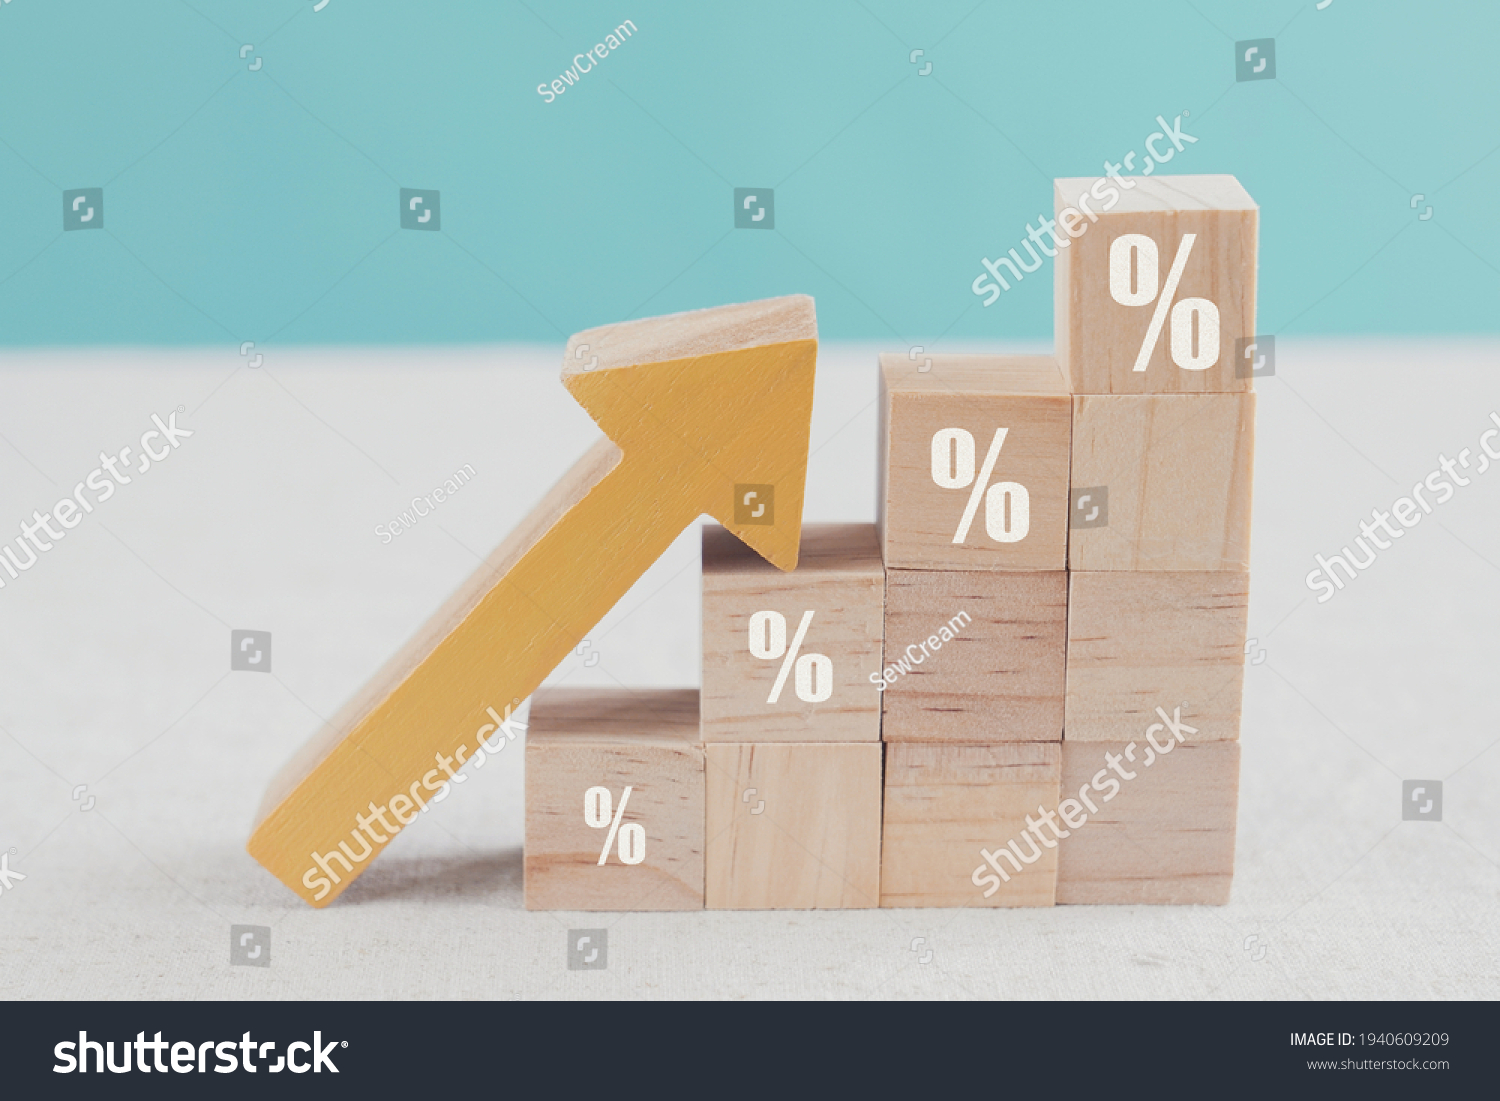 Wooden blocks with percentage sign and arrow up, financial growth, interest rate increase, inflation, sale price and tax rise concept  #1940609209